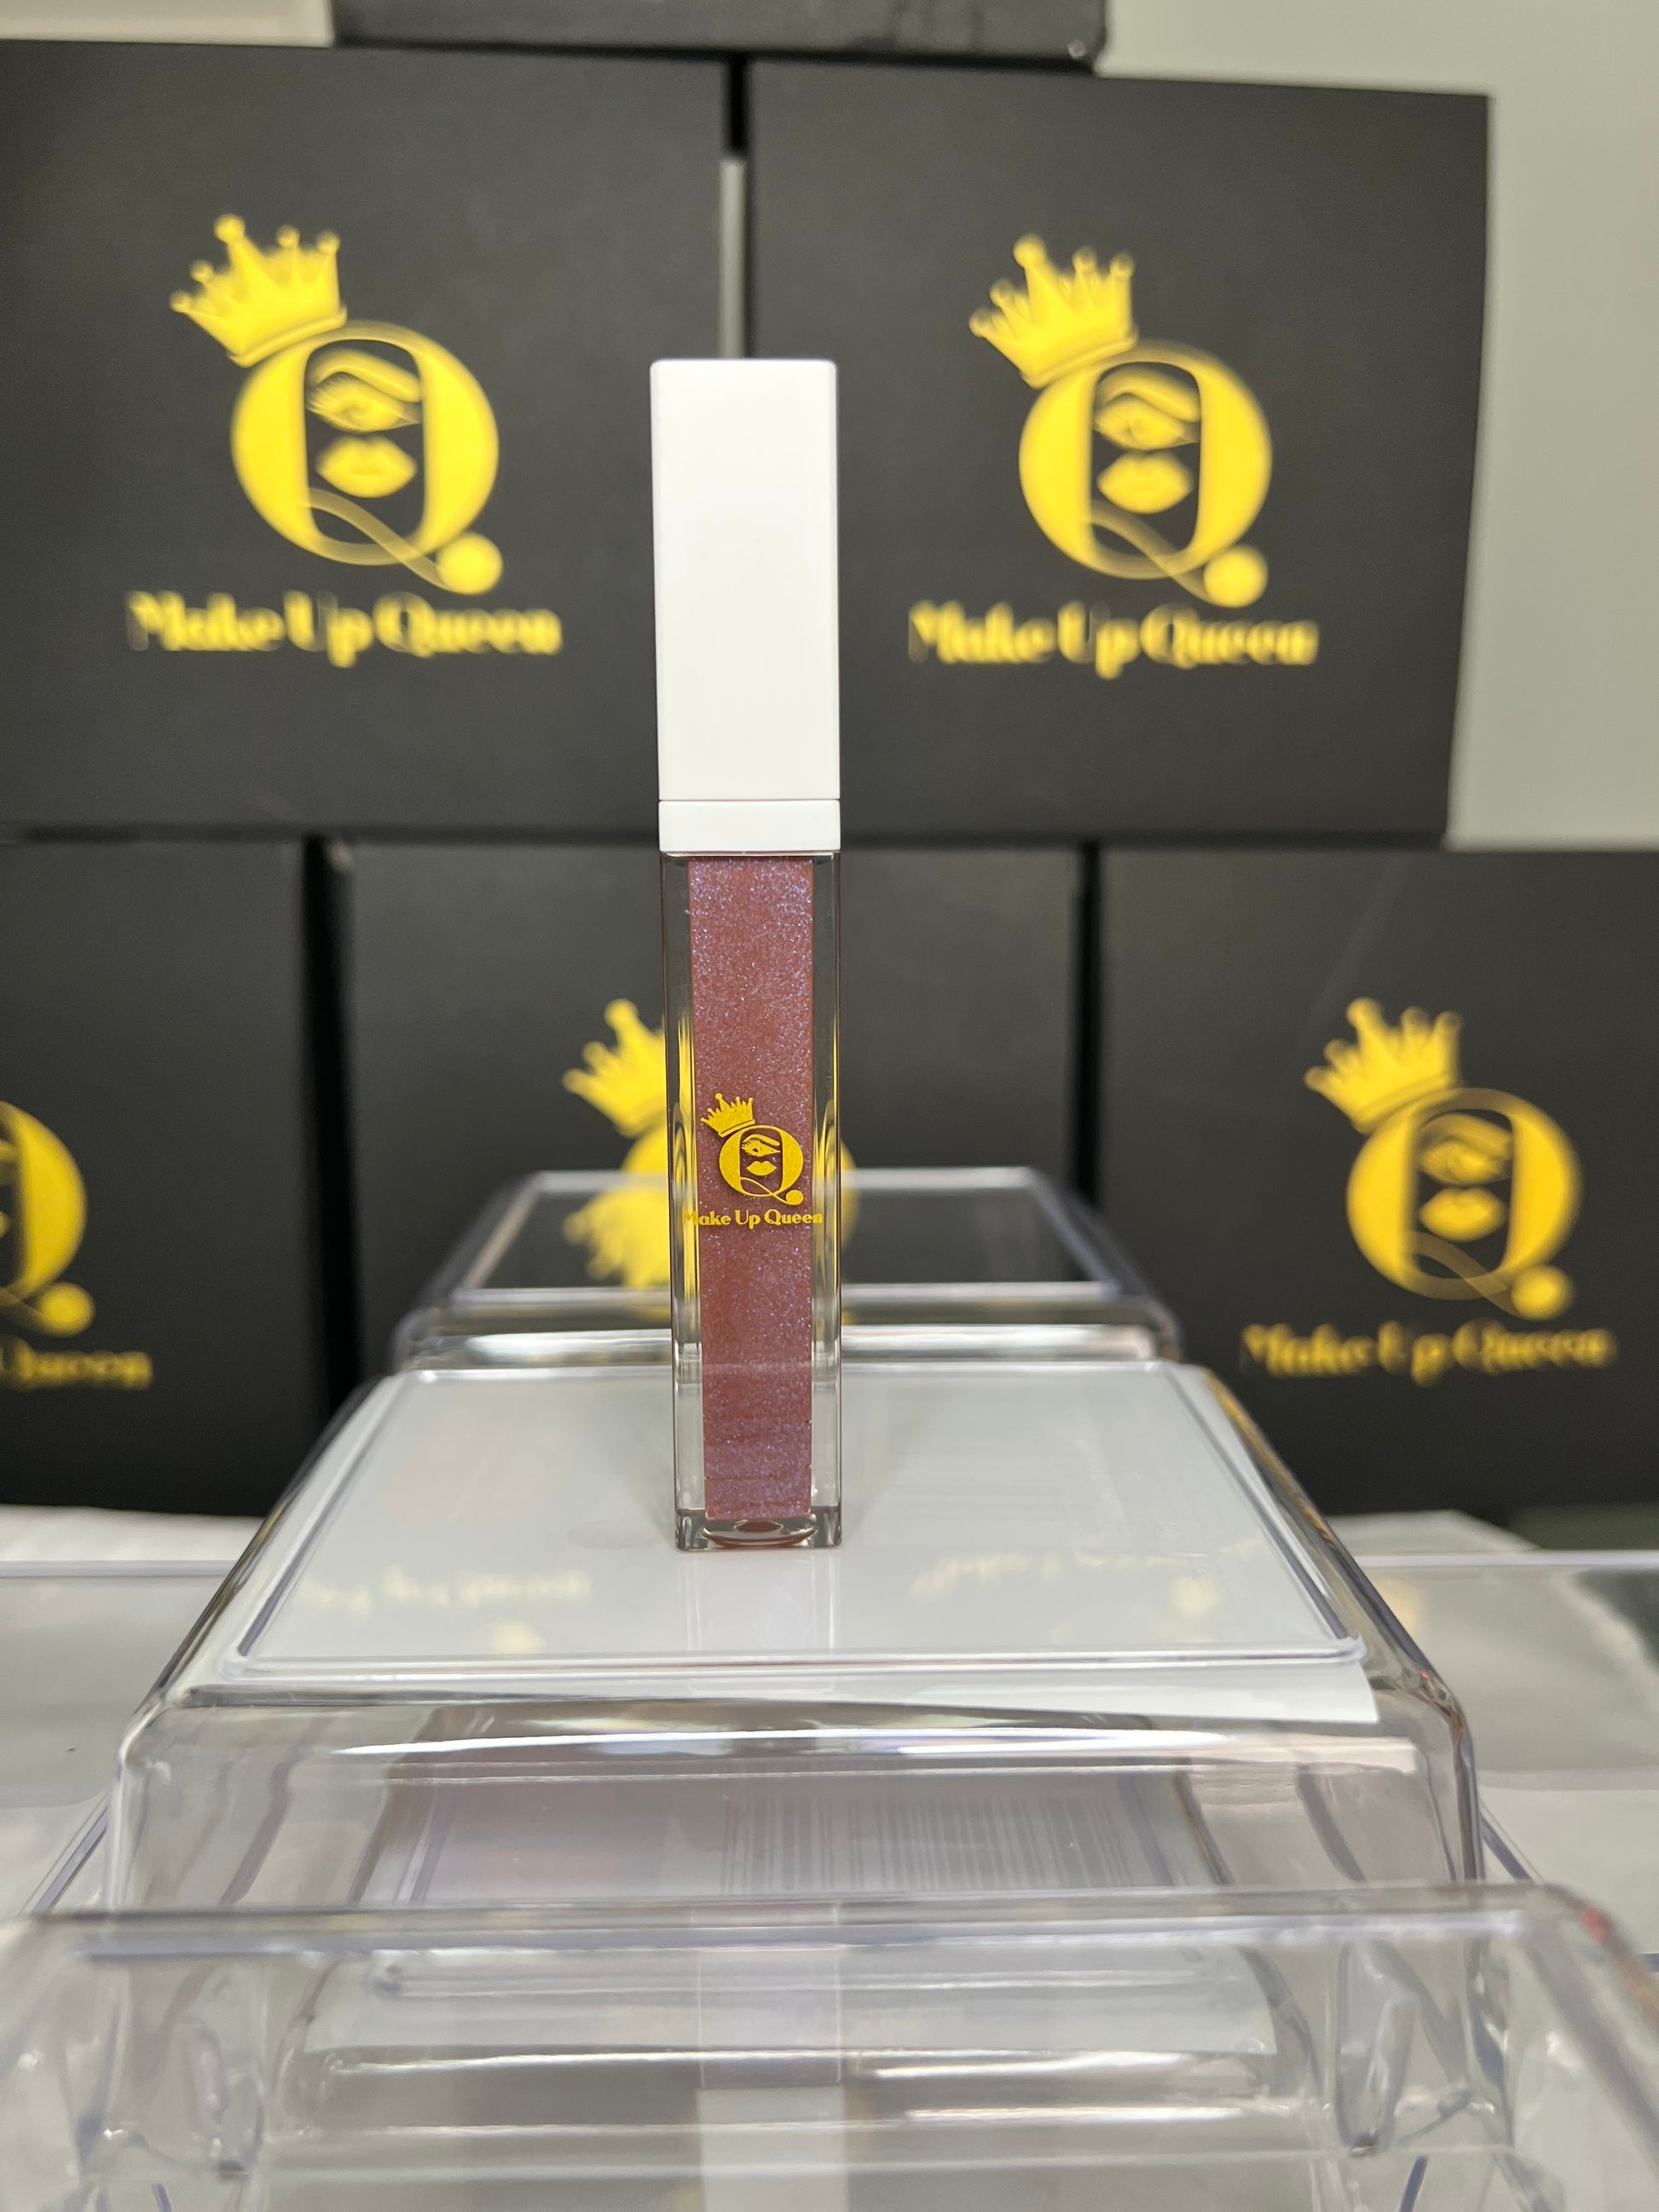 Paraben Free / EU Compliant / Gluten Free and Vegan/ Cruelty Free  Square: Net Wt. 40g/  This pigmented lightweight long lasting lip-gloss can be worn alone or layered with our liquid matte long wearing lipstick for long lasting color and shine. You can expect the following while wearing our lip-gloss! shine; plump; holographic; clear; shimmer;' glitter; soothing; translucent; frosted; glittery; glossy; nourish; cushiony; smooth; smudge proof; moisture；